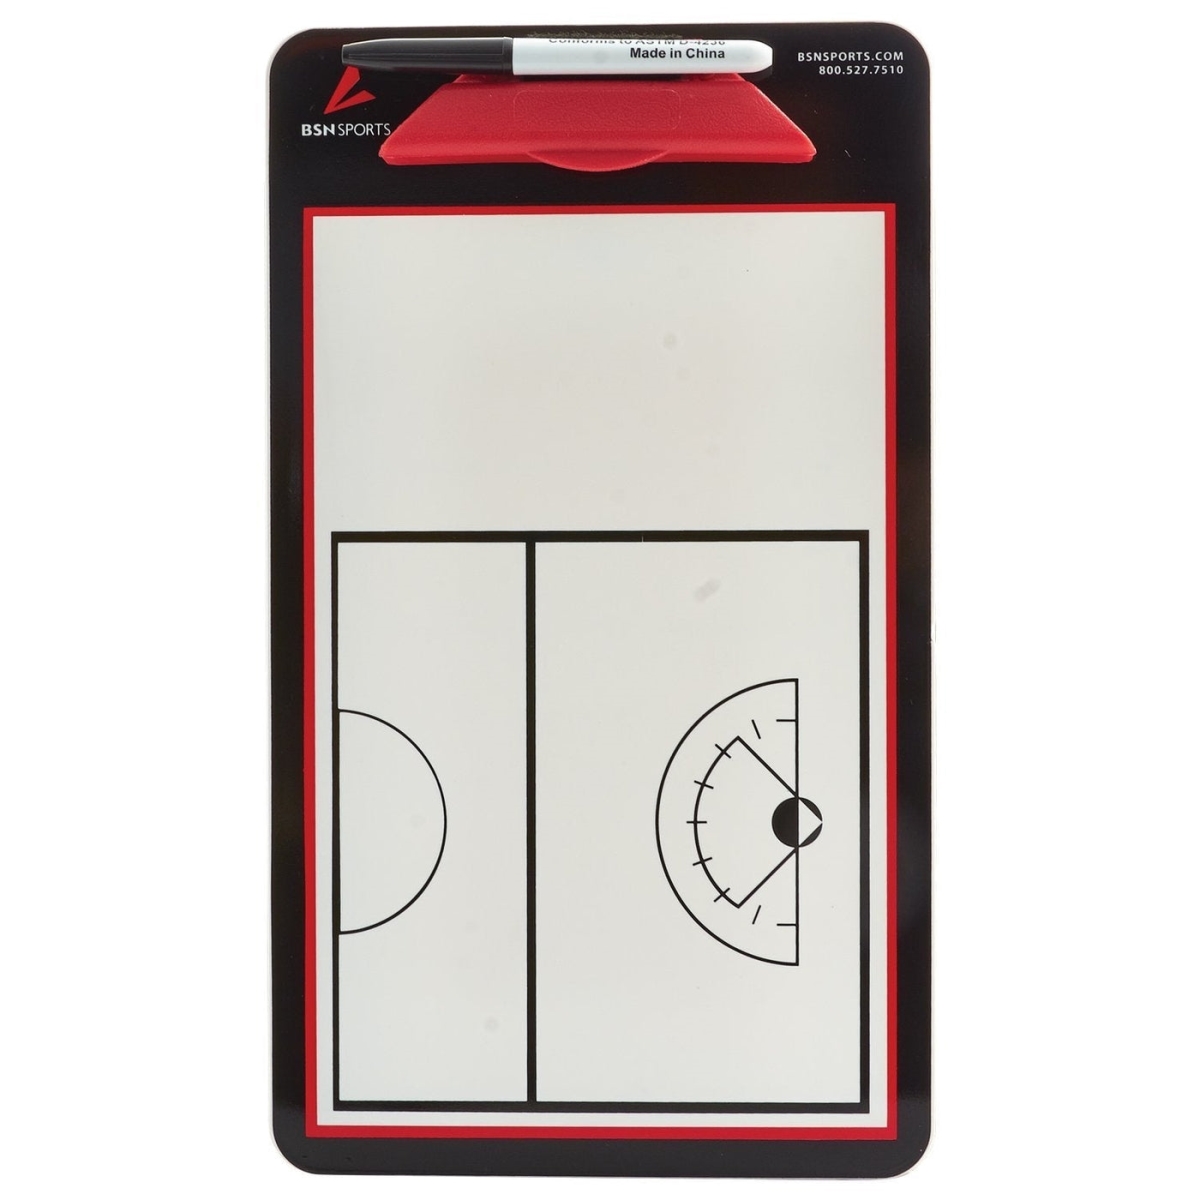 Picture of SSG 1388112 BSN Sports Double Sided Womens Lacrosse Coaching Board